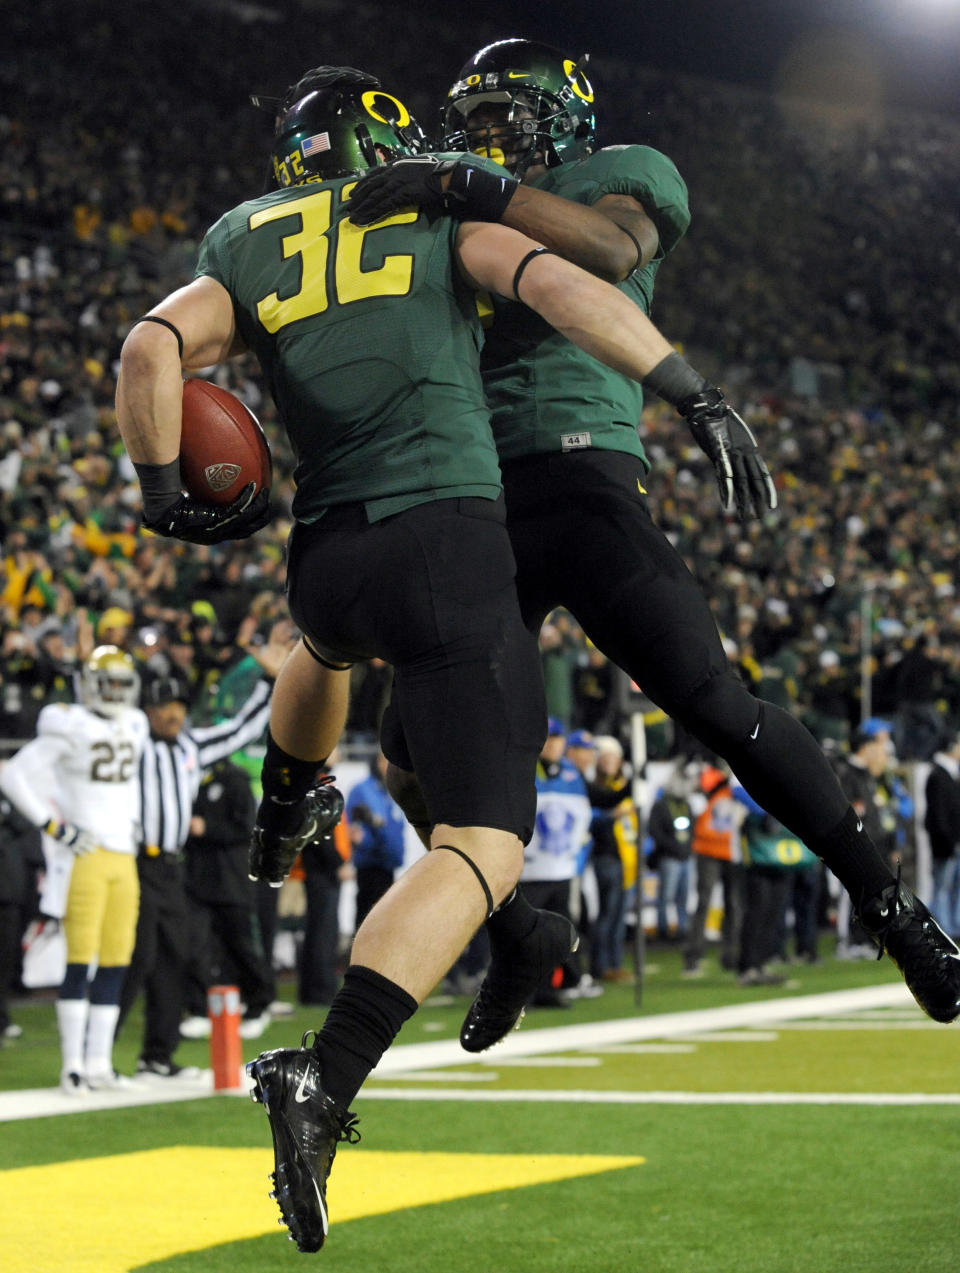 EUGENE, OR - DECEMBER 02 : Tight end Colt Lyerla #32 of the Oregon Ducks celebrates after catching a touchdown pass in the first quarter of the Pac-12 Championship game against the UCLA Bruins at Autzen Stadium on December 2, 2011 in Eugene, Oregon. (Photo by Steve Dykes/Getty Images)